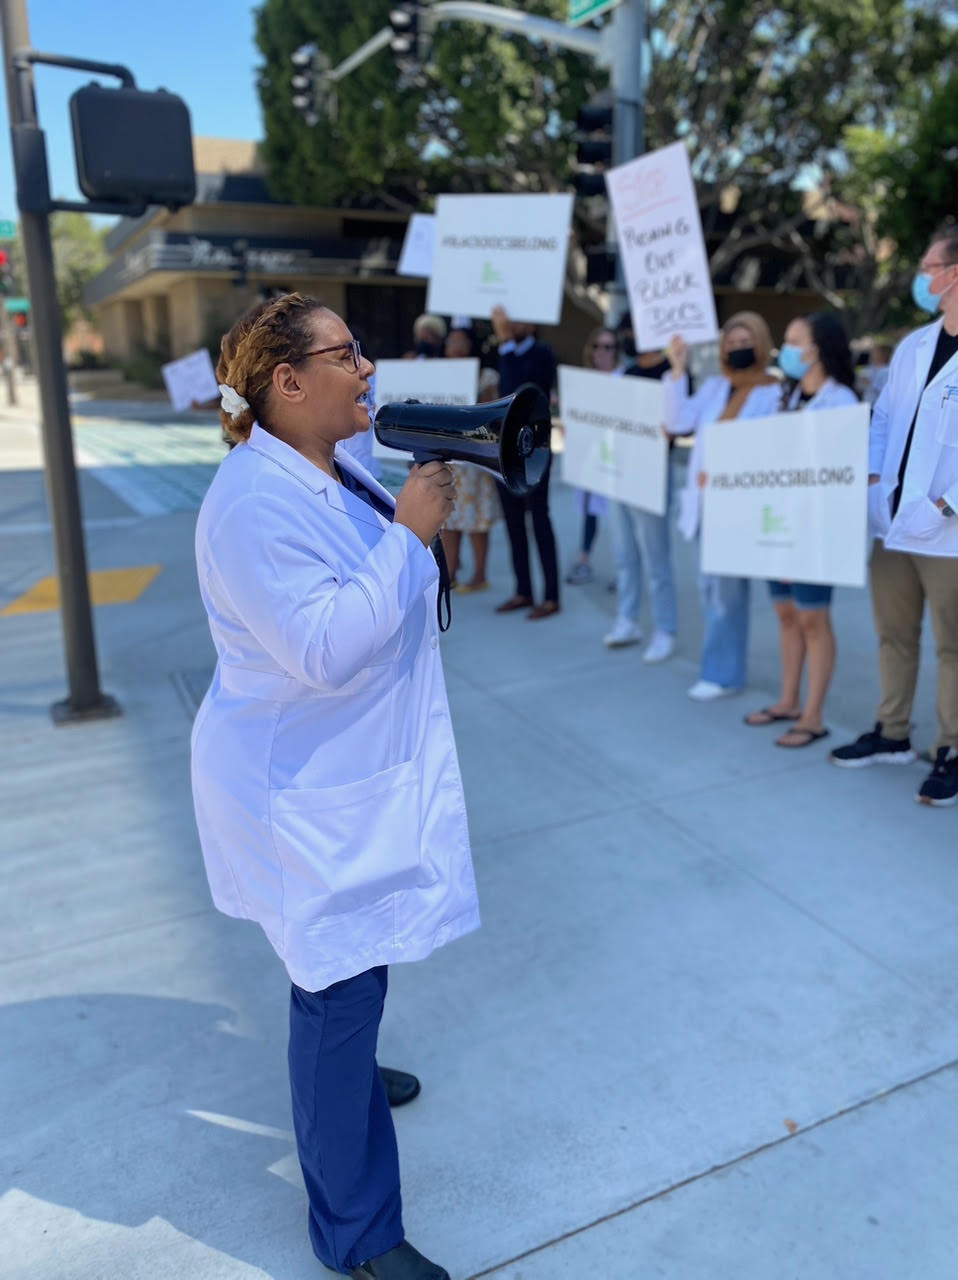 Dr. Aysha Khoury speaks at a rally held on Aug. 26, 2022, the second anniversary of her suspension from the Kaiser Permanente Bernard J. Tyson School of Medicine. (Jasmyne Cannick)